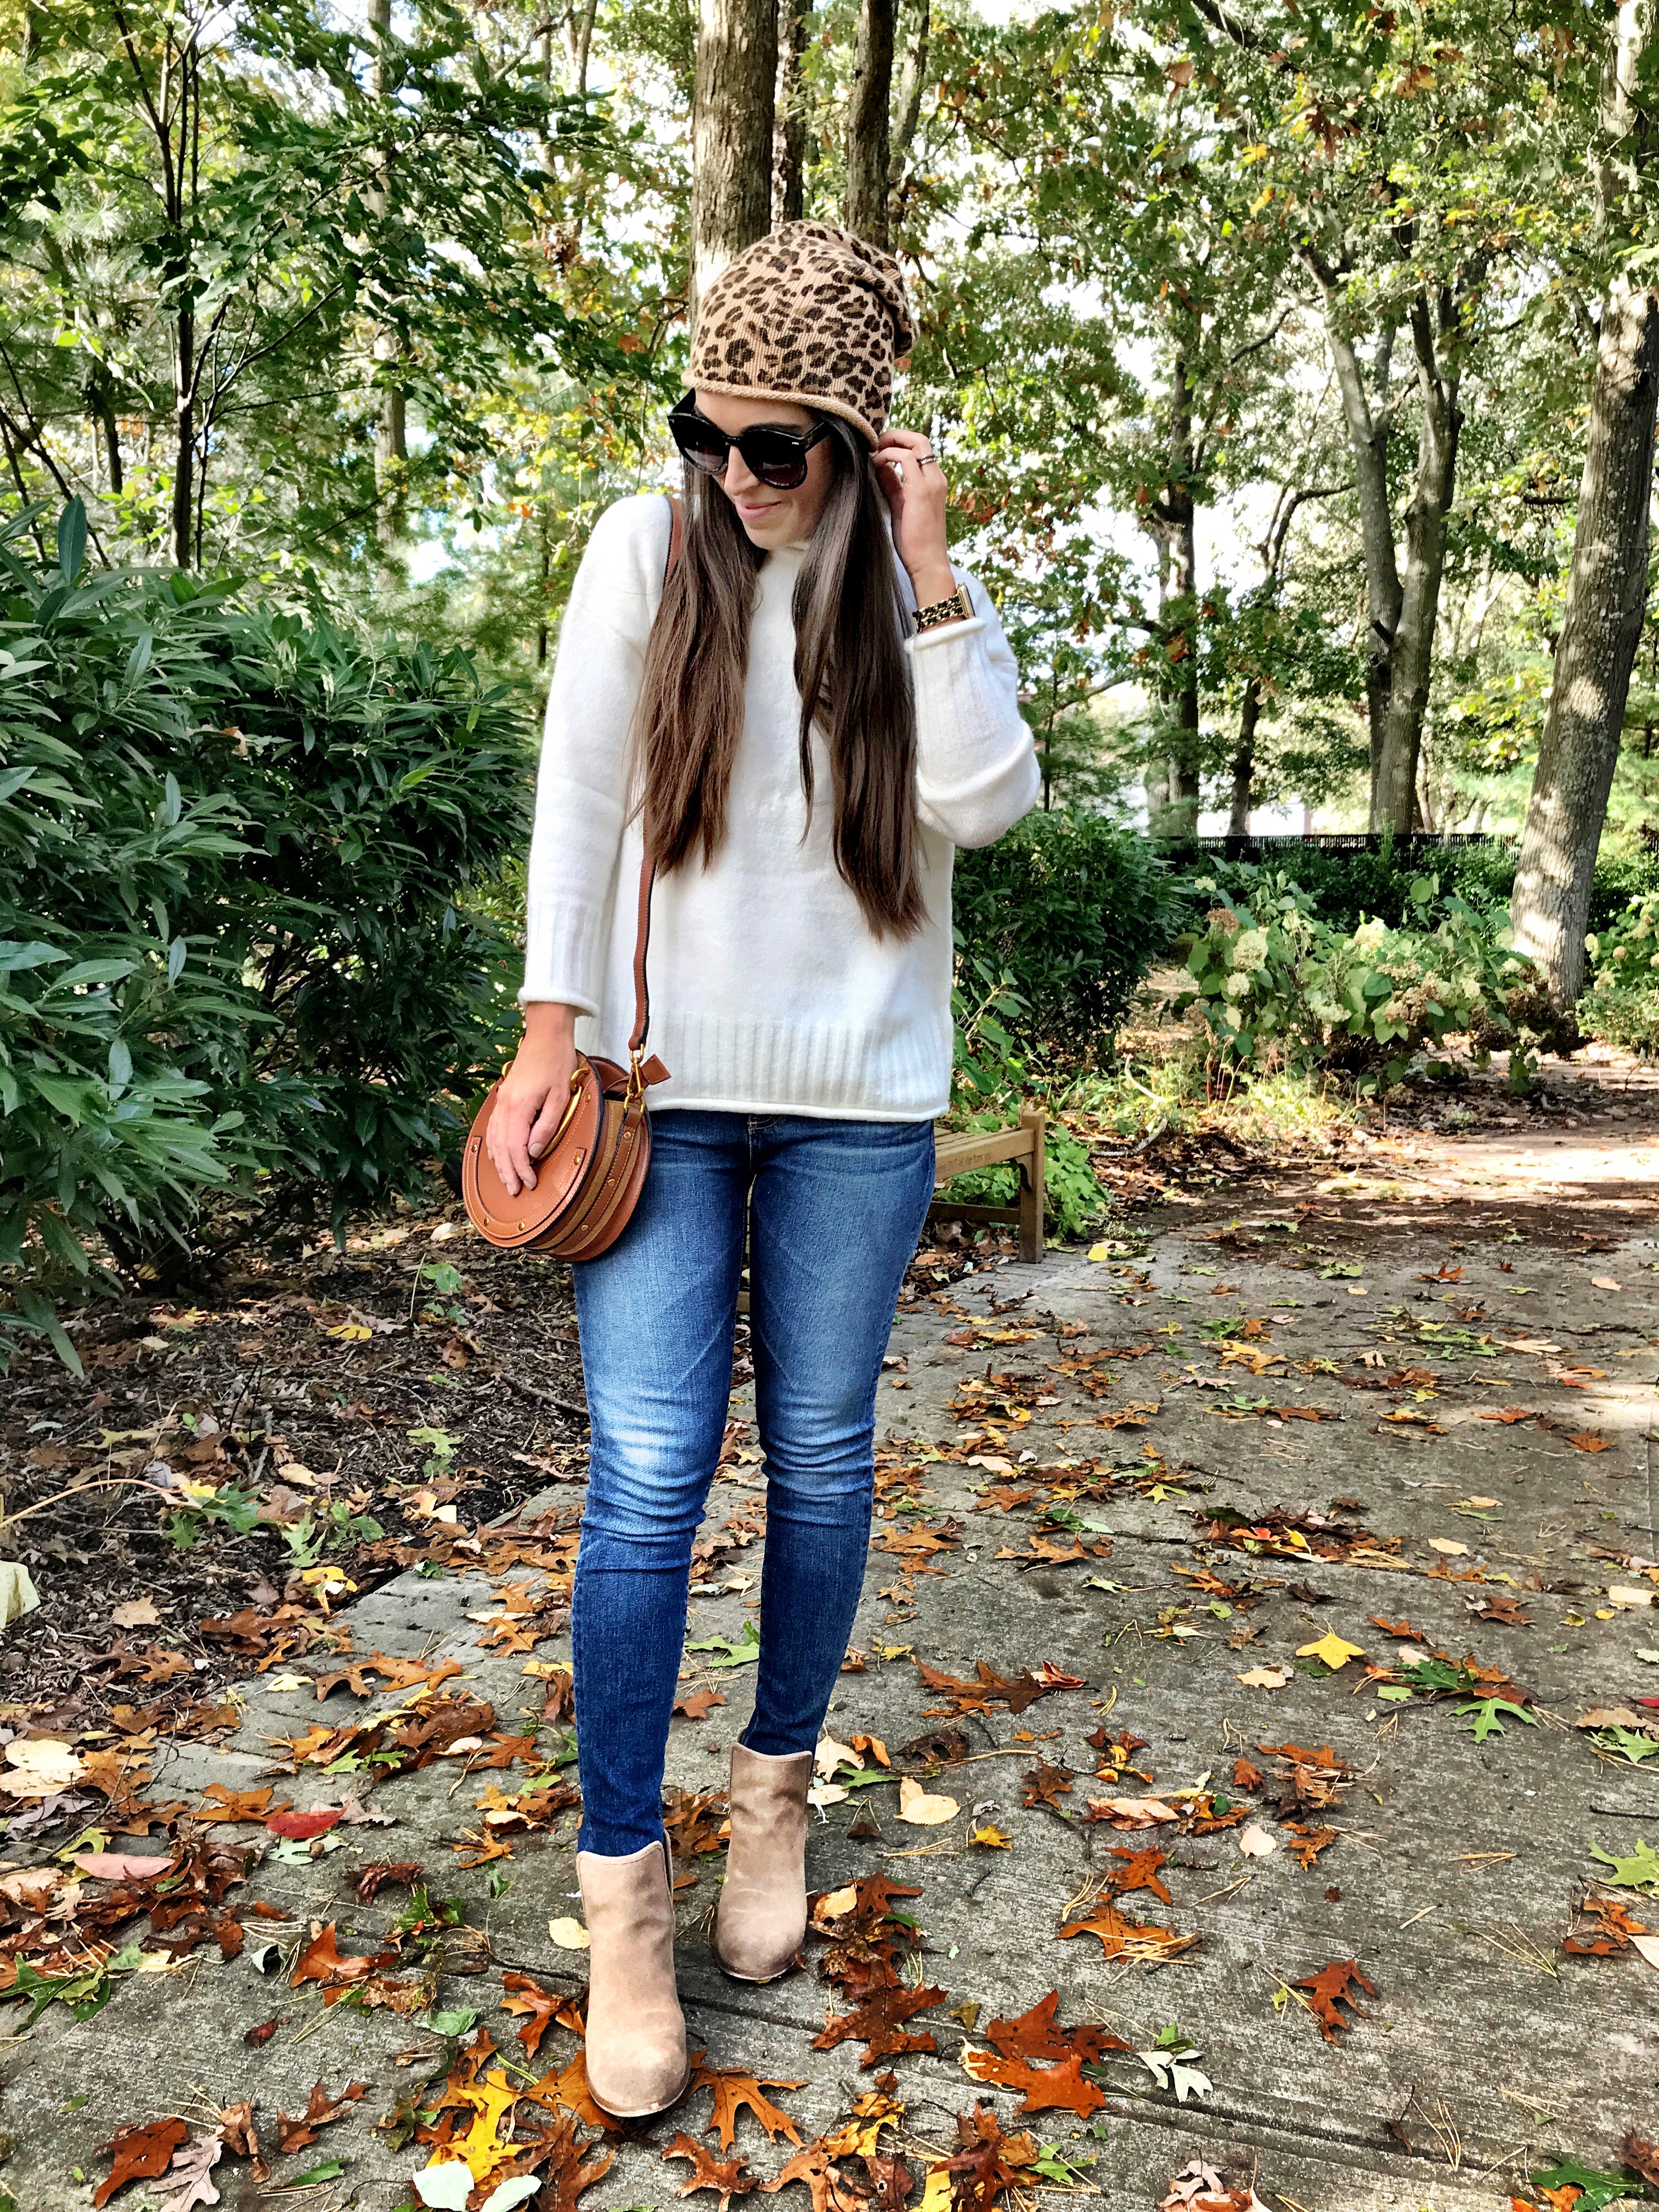 Leopard Beanie Outfits For Women (4 ideas & outfits)